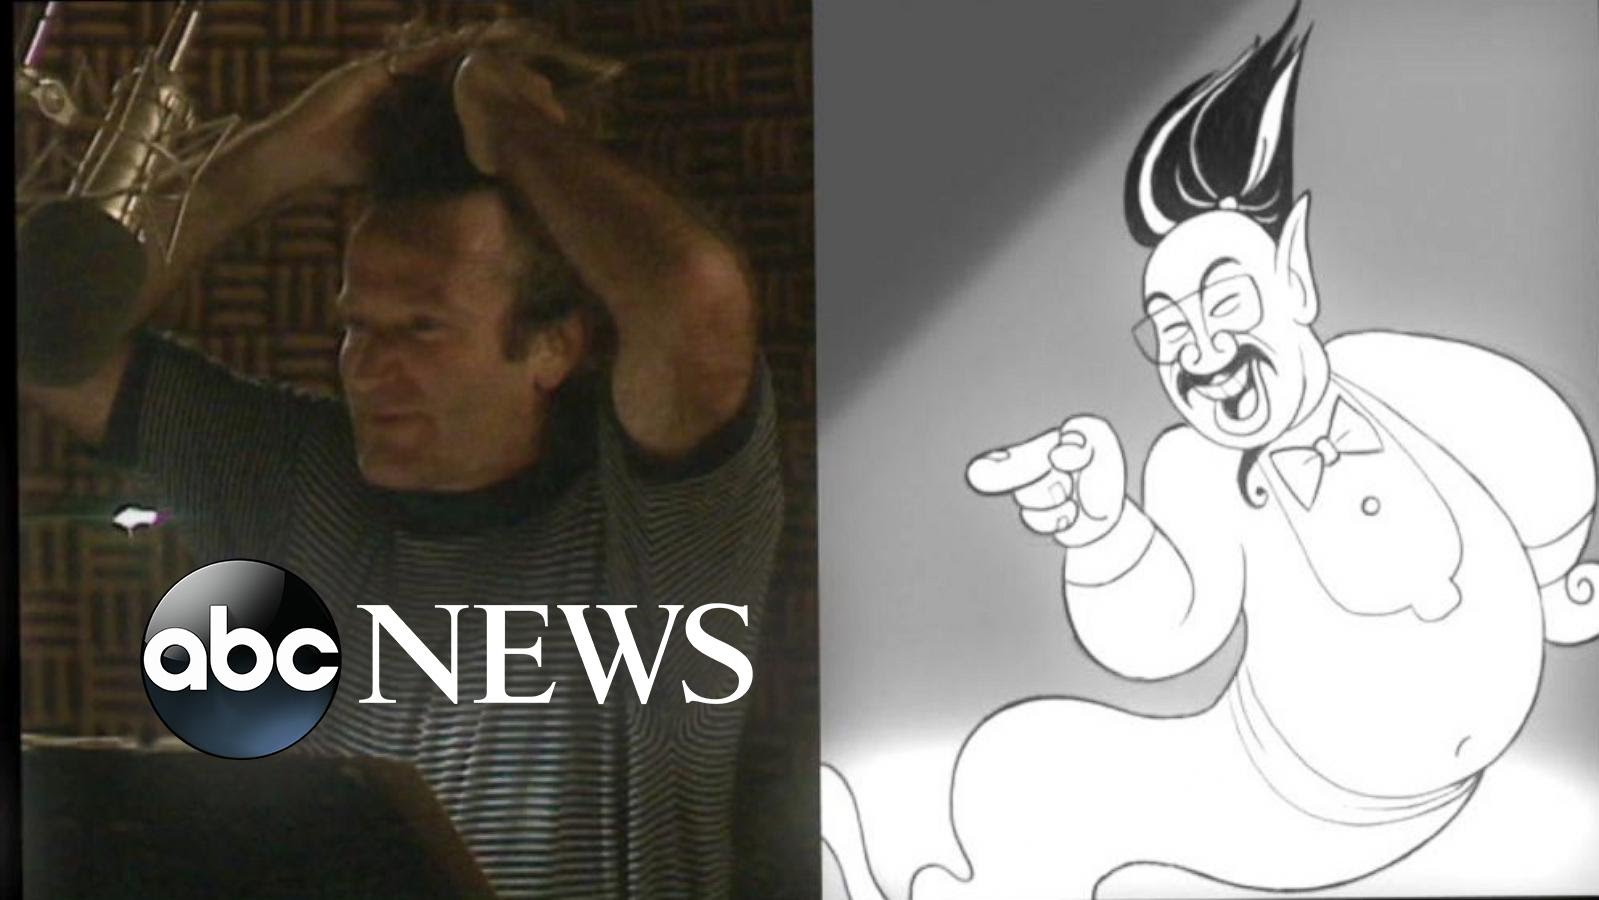 Never-Before-Seen Outtakes of Robin Williams as Genie in Disney's 'Aladdin'